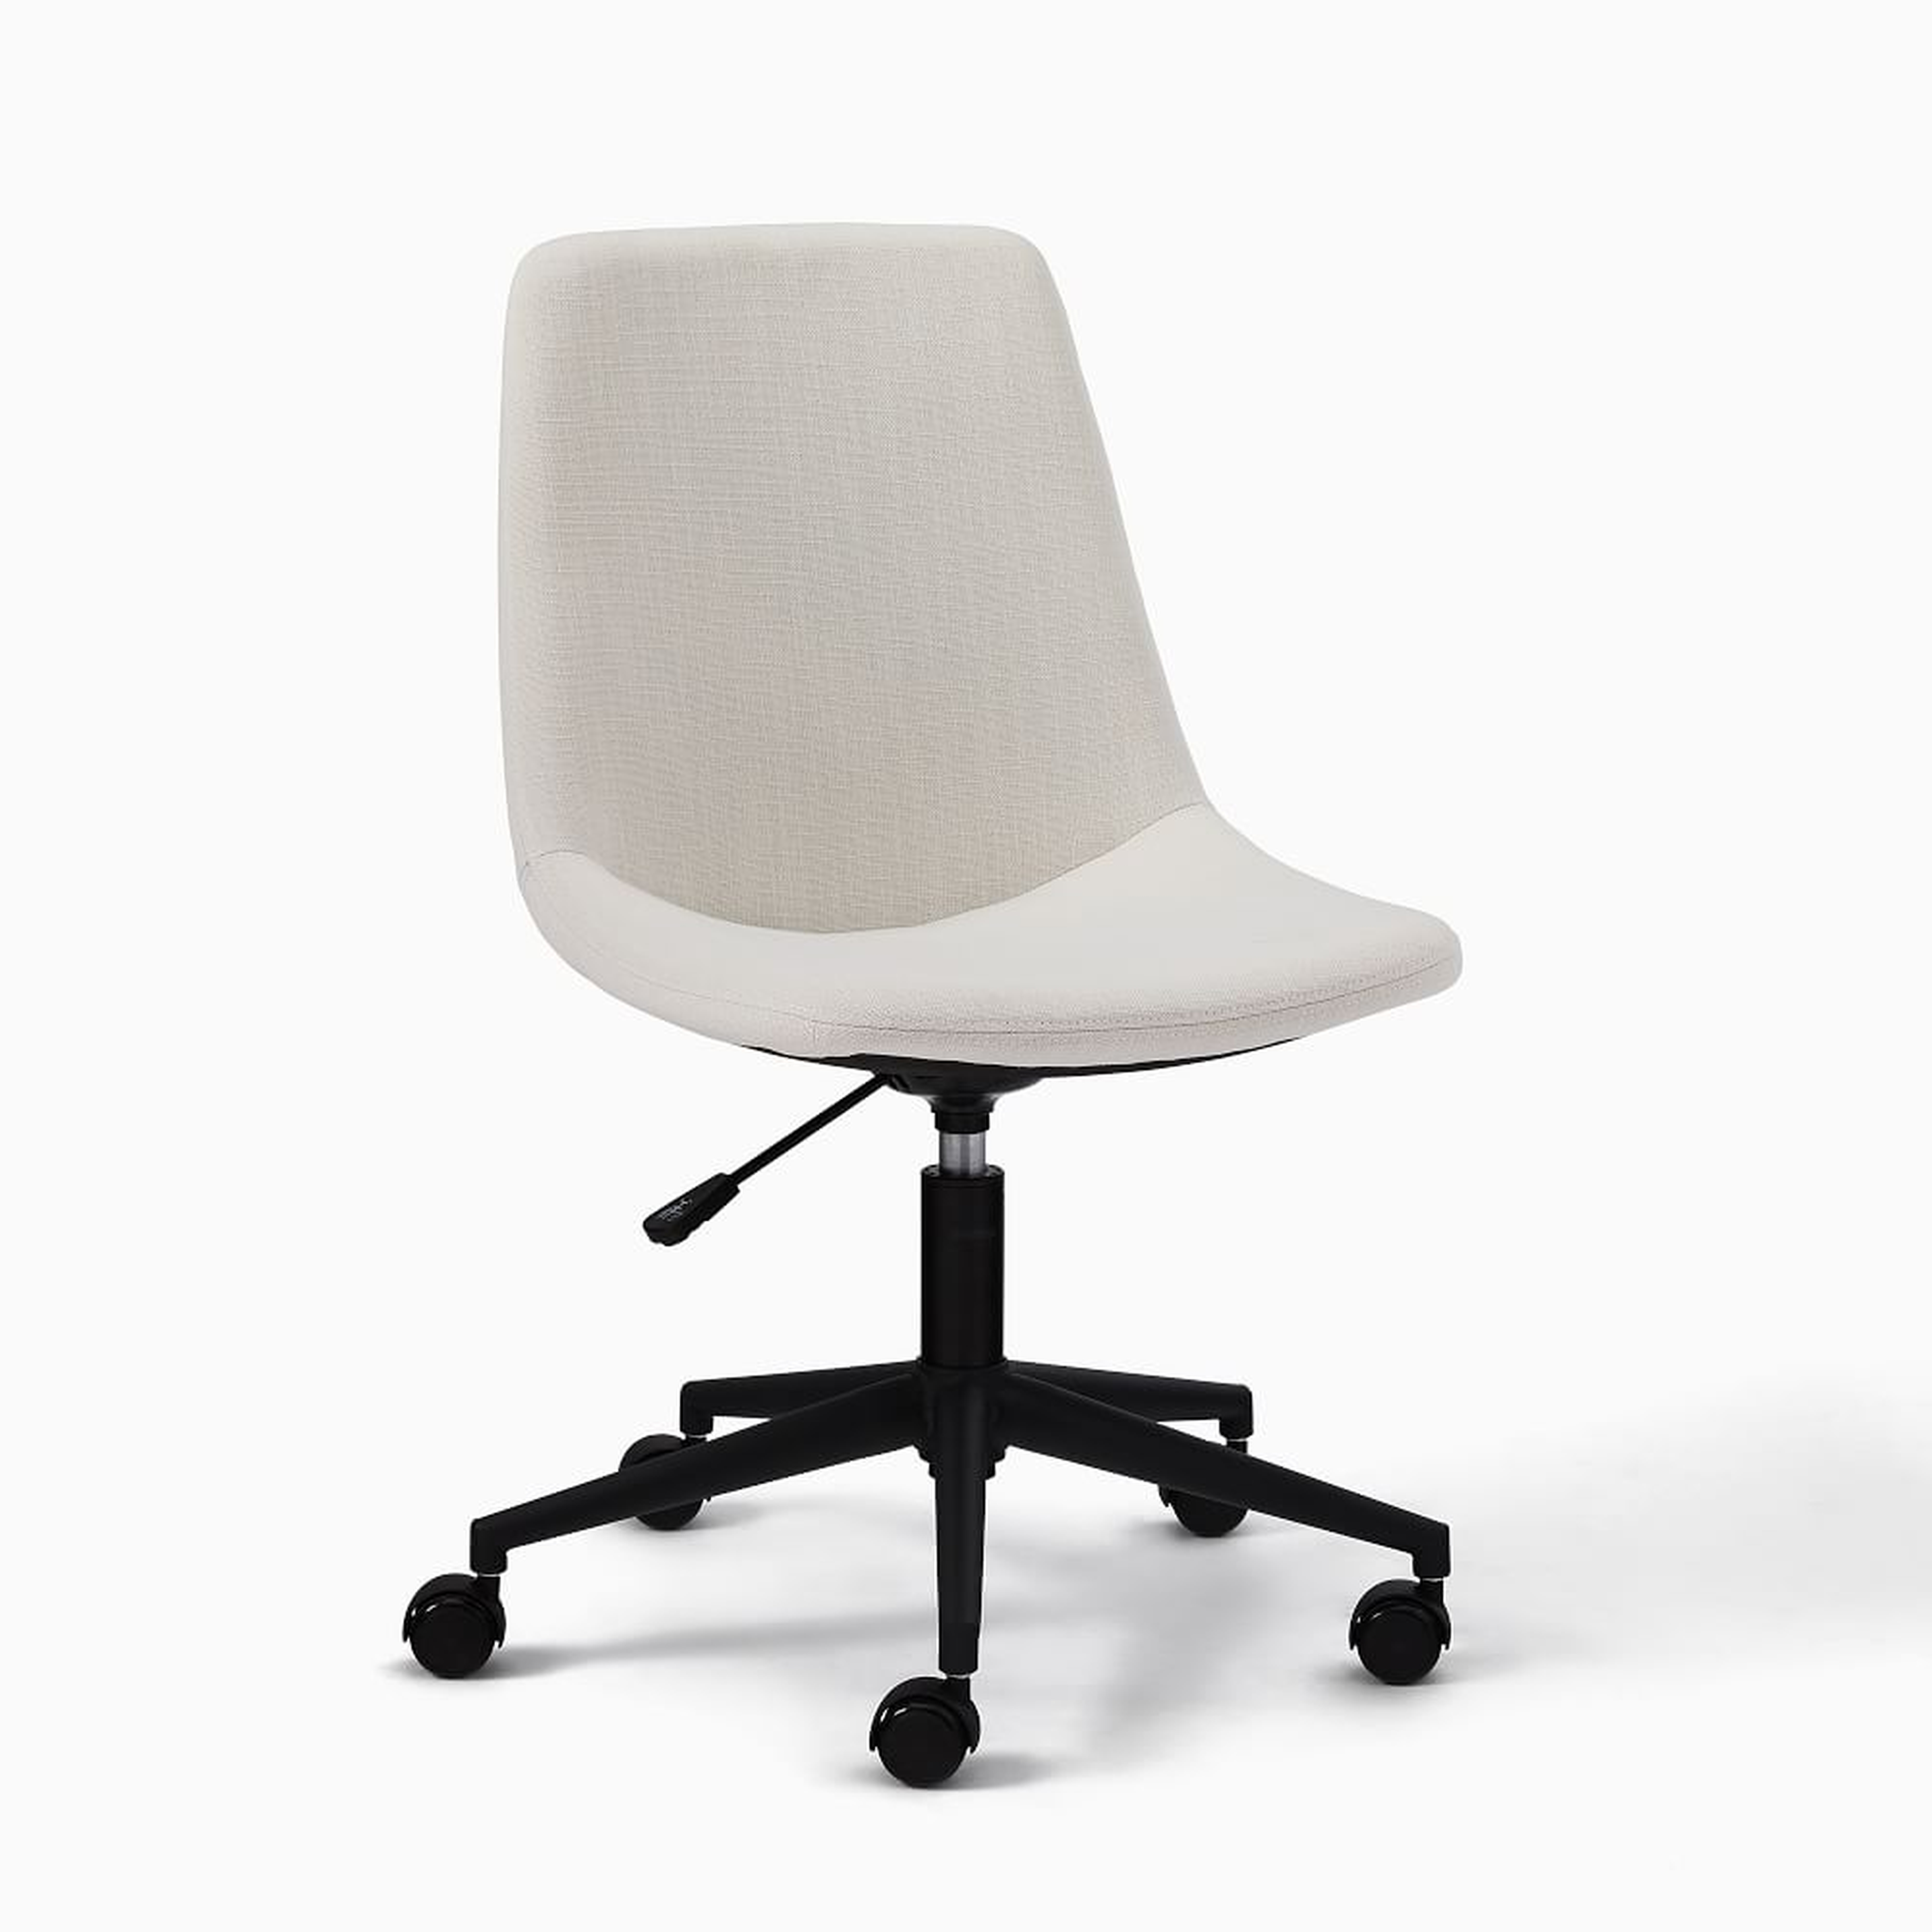 We Maine Collection Ydlw Stone White Office Chair - West Elm